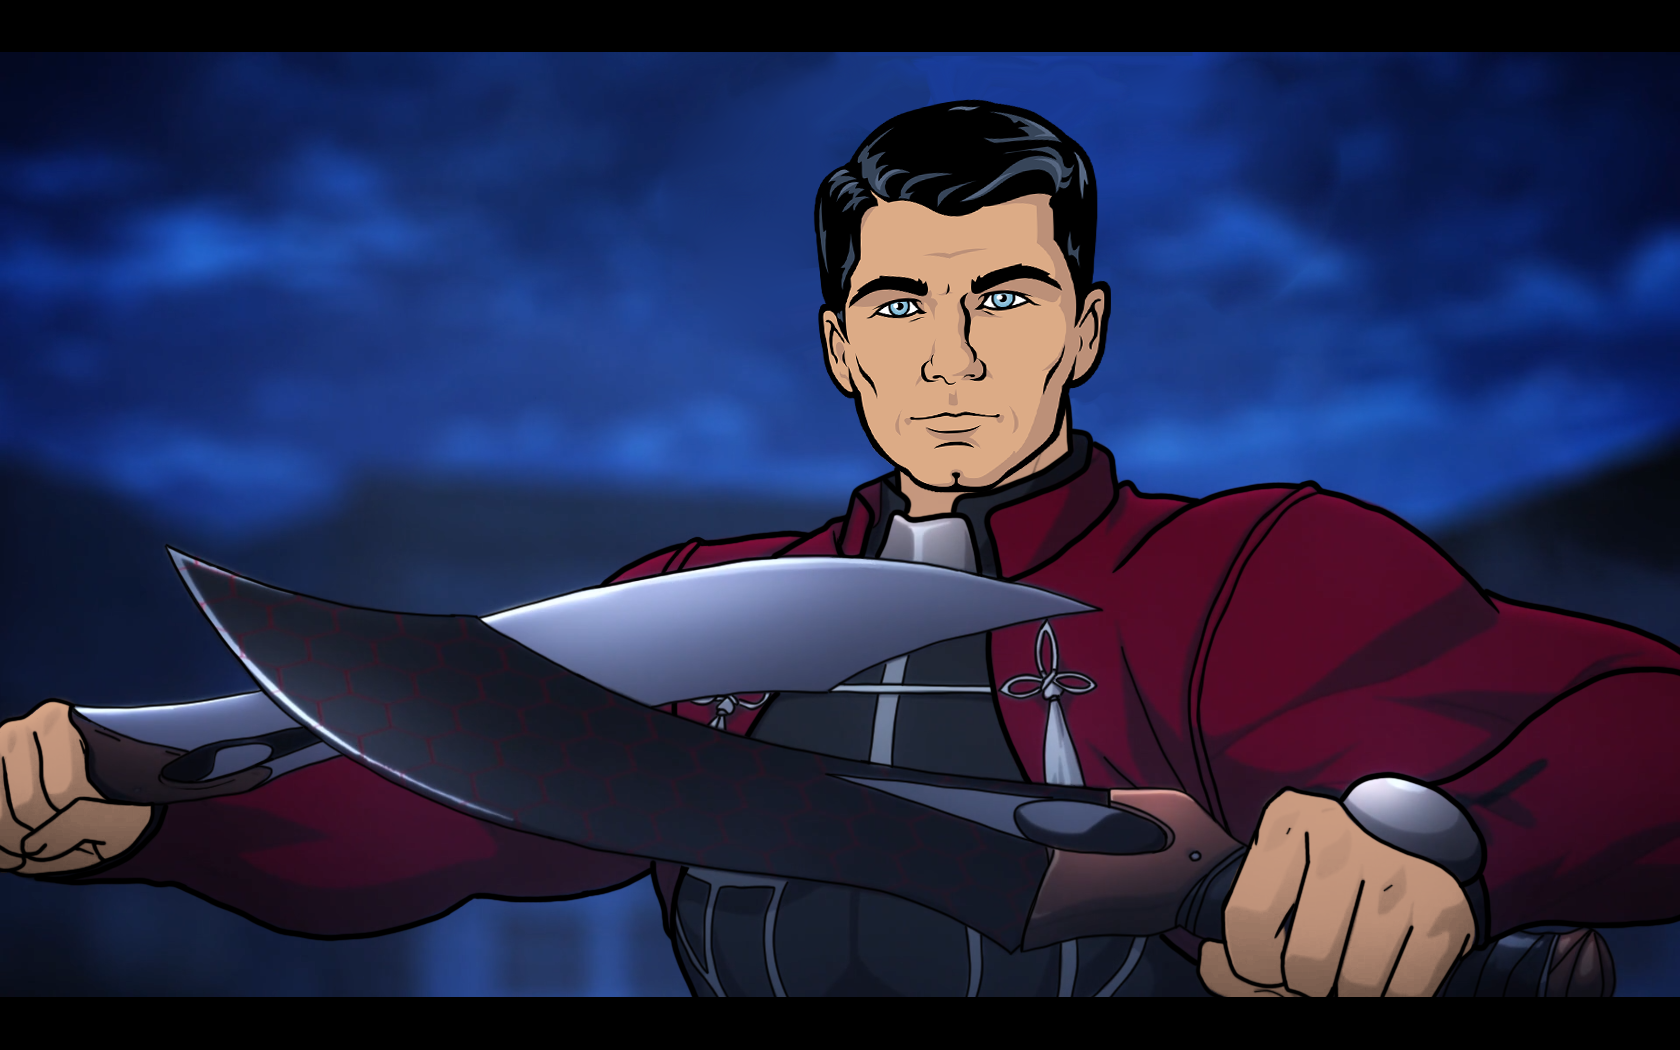 __archer_and_sterling_archer_fate_and_2_more_drawn_by_intellectual_deviant__3d7fd95b8261c1d02a59ac40290783a7.png